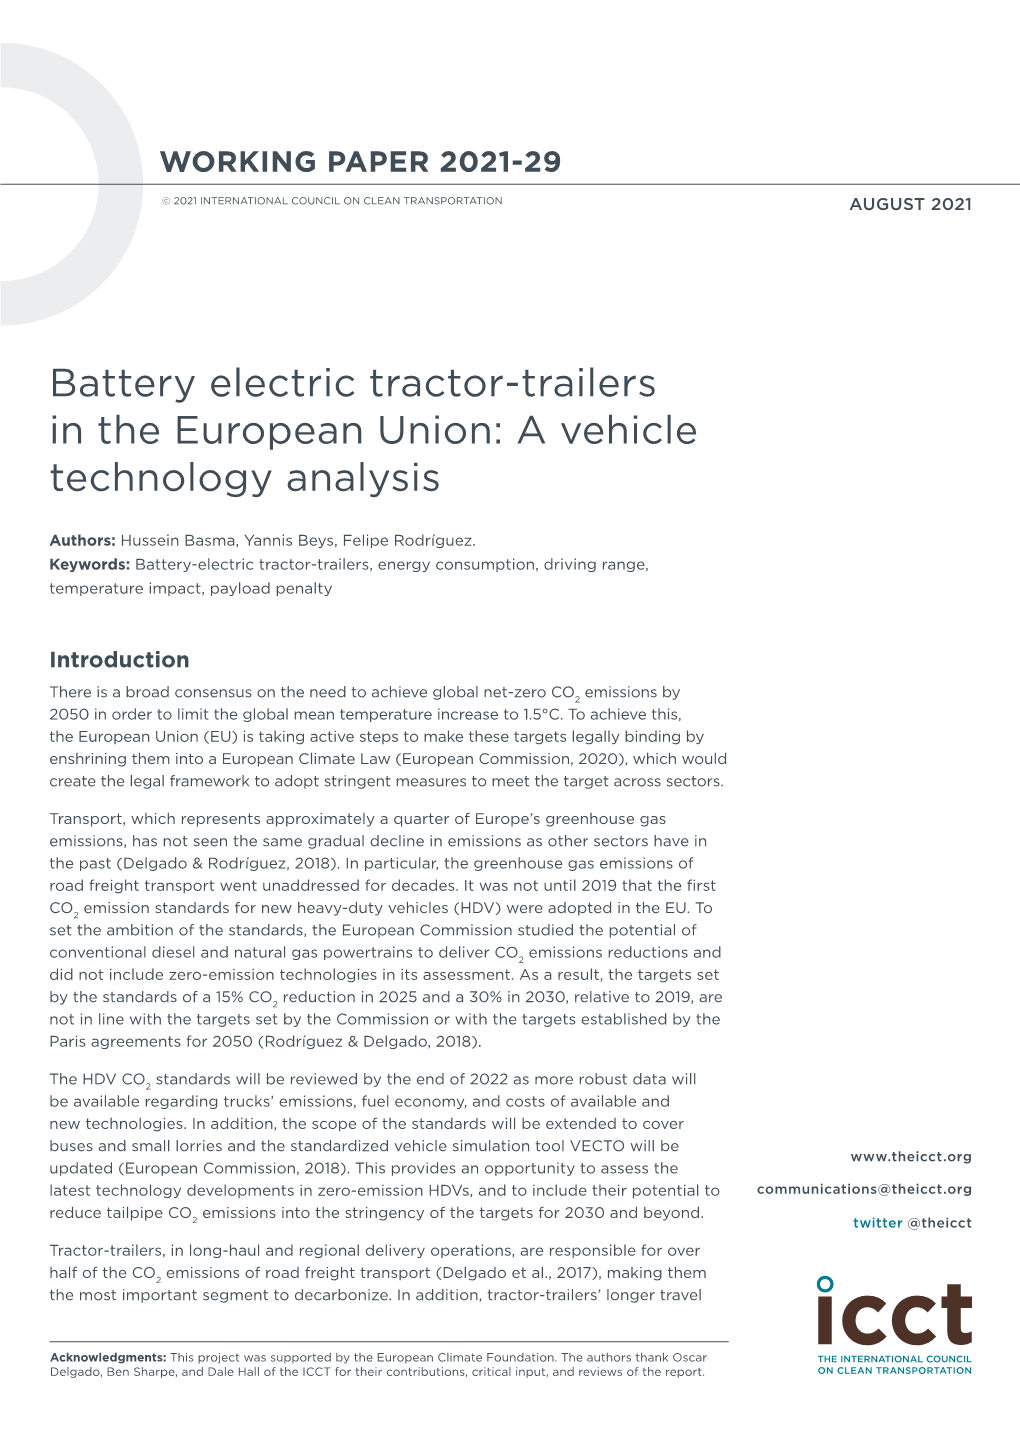 Battery Electric Tractor-Trailers in the European Union: a Vehicle Technology Analysis